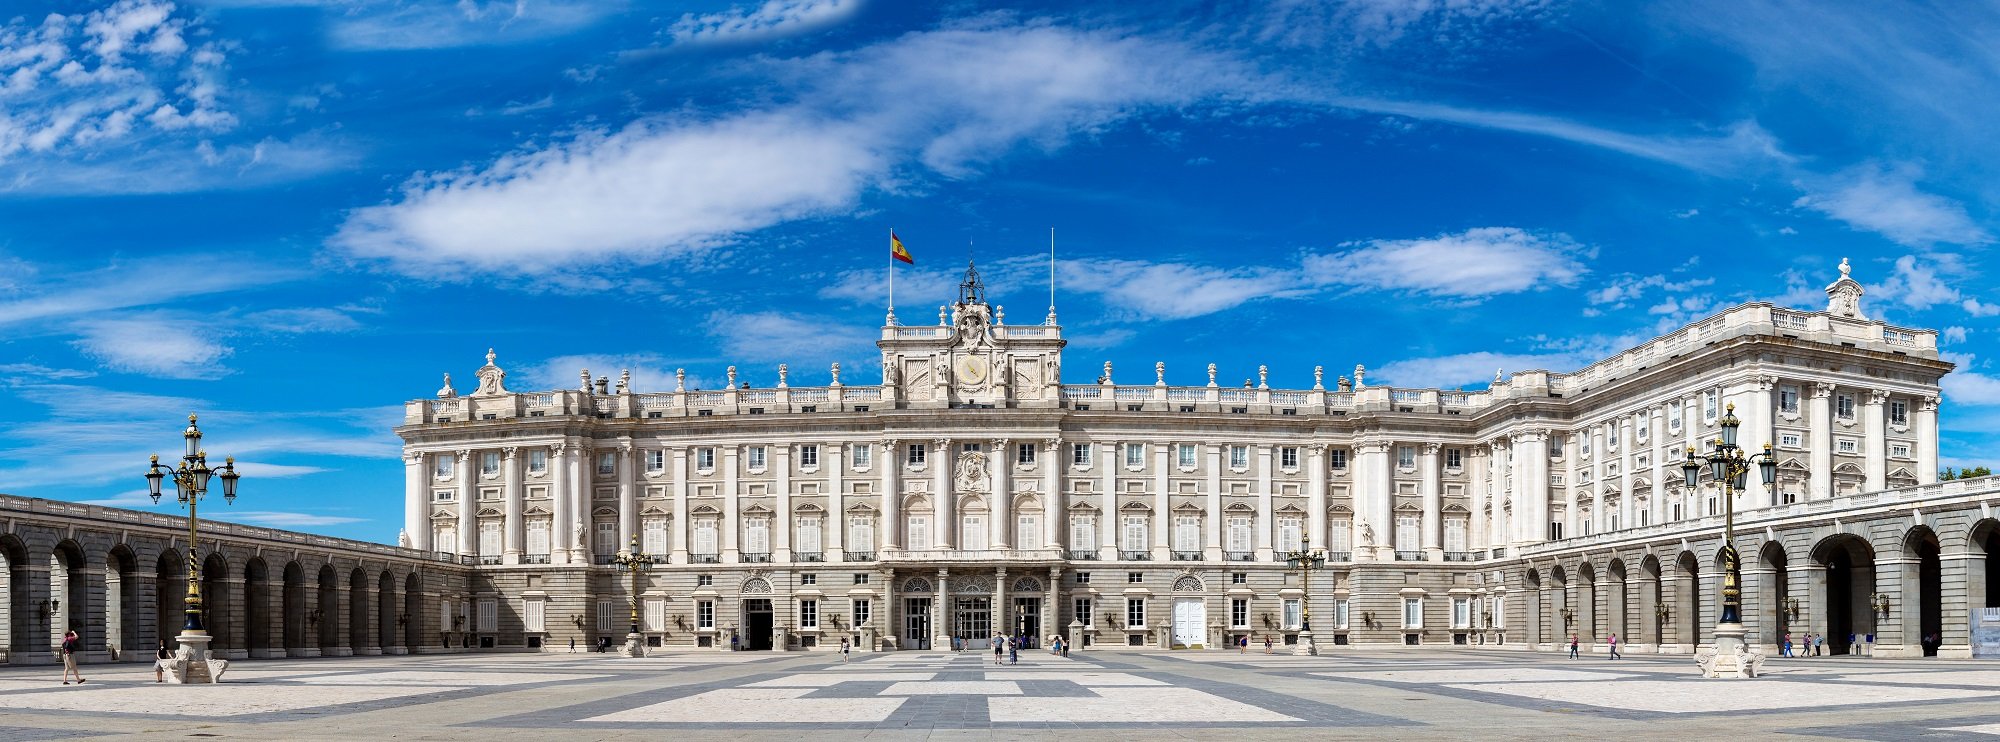 Madrid Royal Palace Private Tour